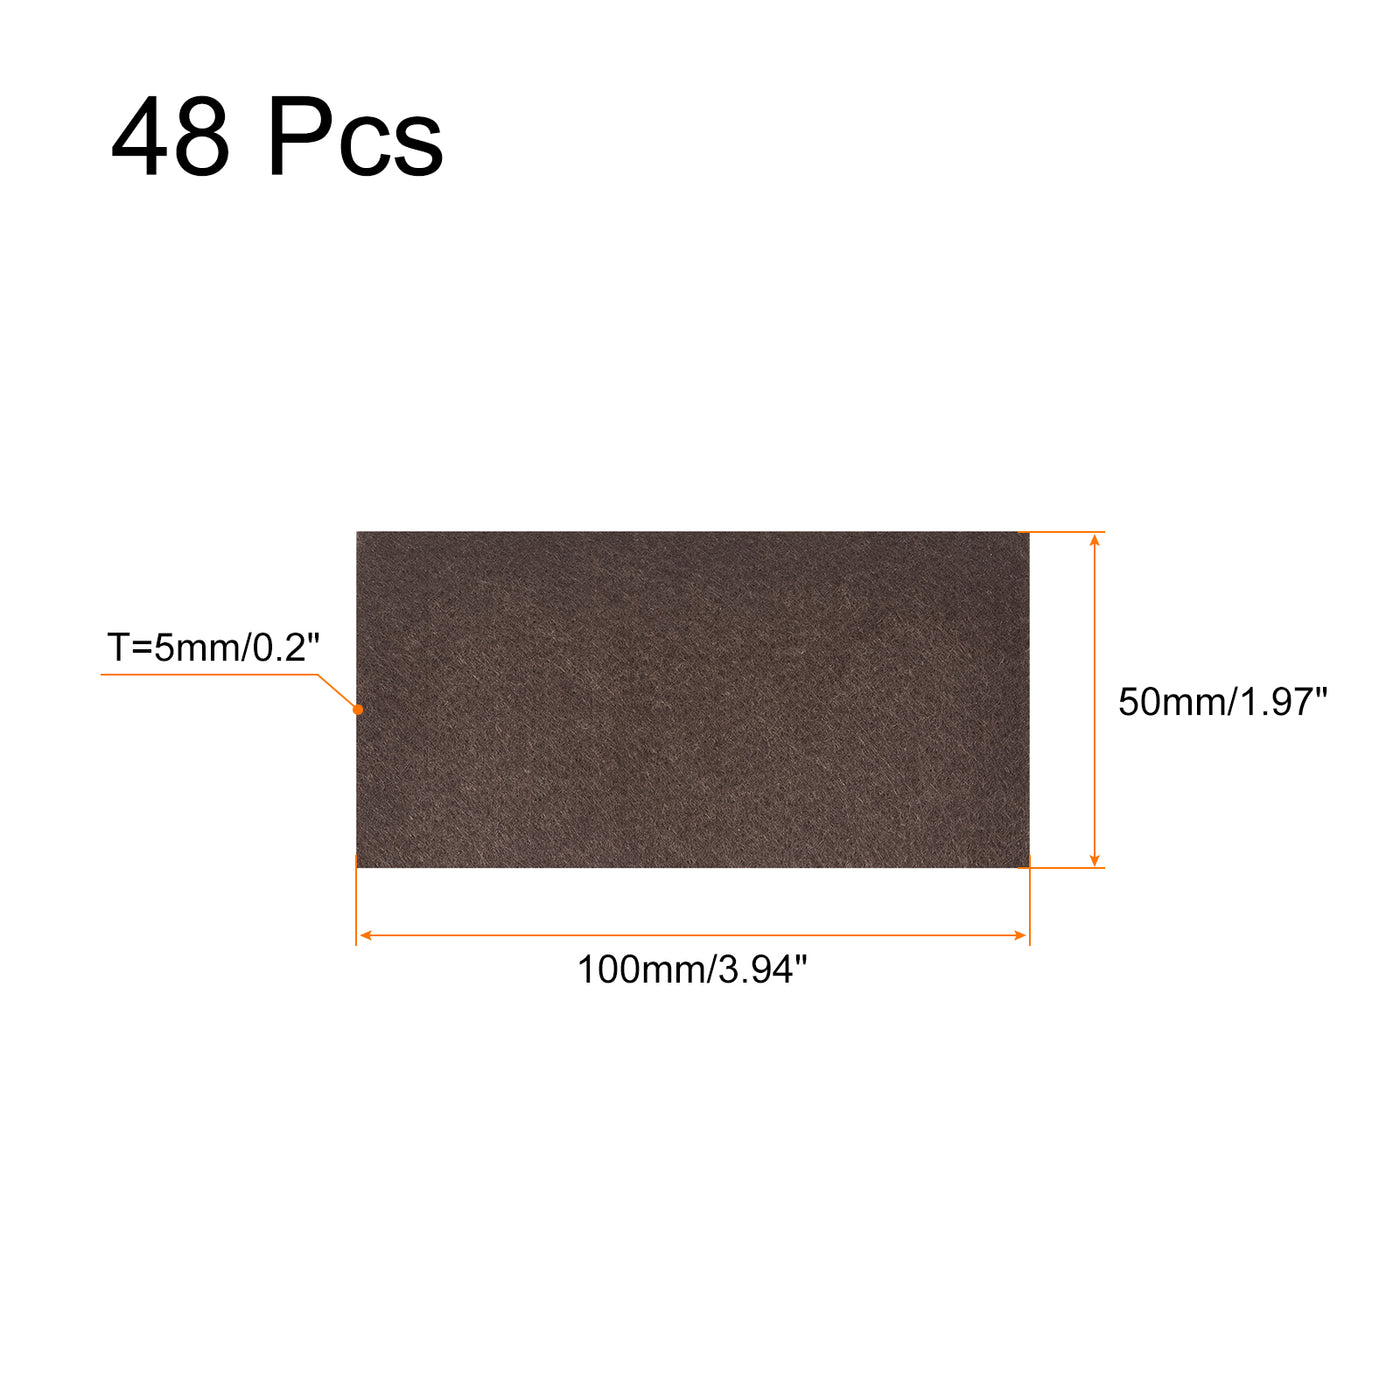 uxcell Uxcell Felt Furniture Pads, 100mm x 50mm Self Adhesive Square Floor Protectors for Furniture Legs Hardwood Floor, Brown 48Pcs